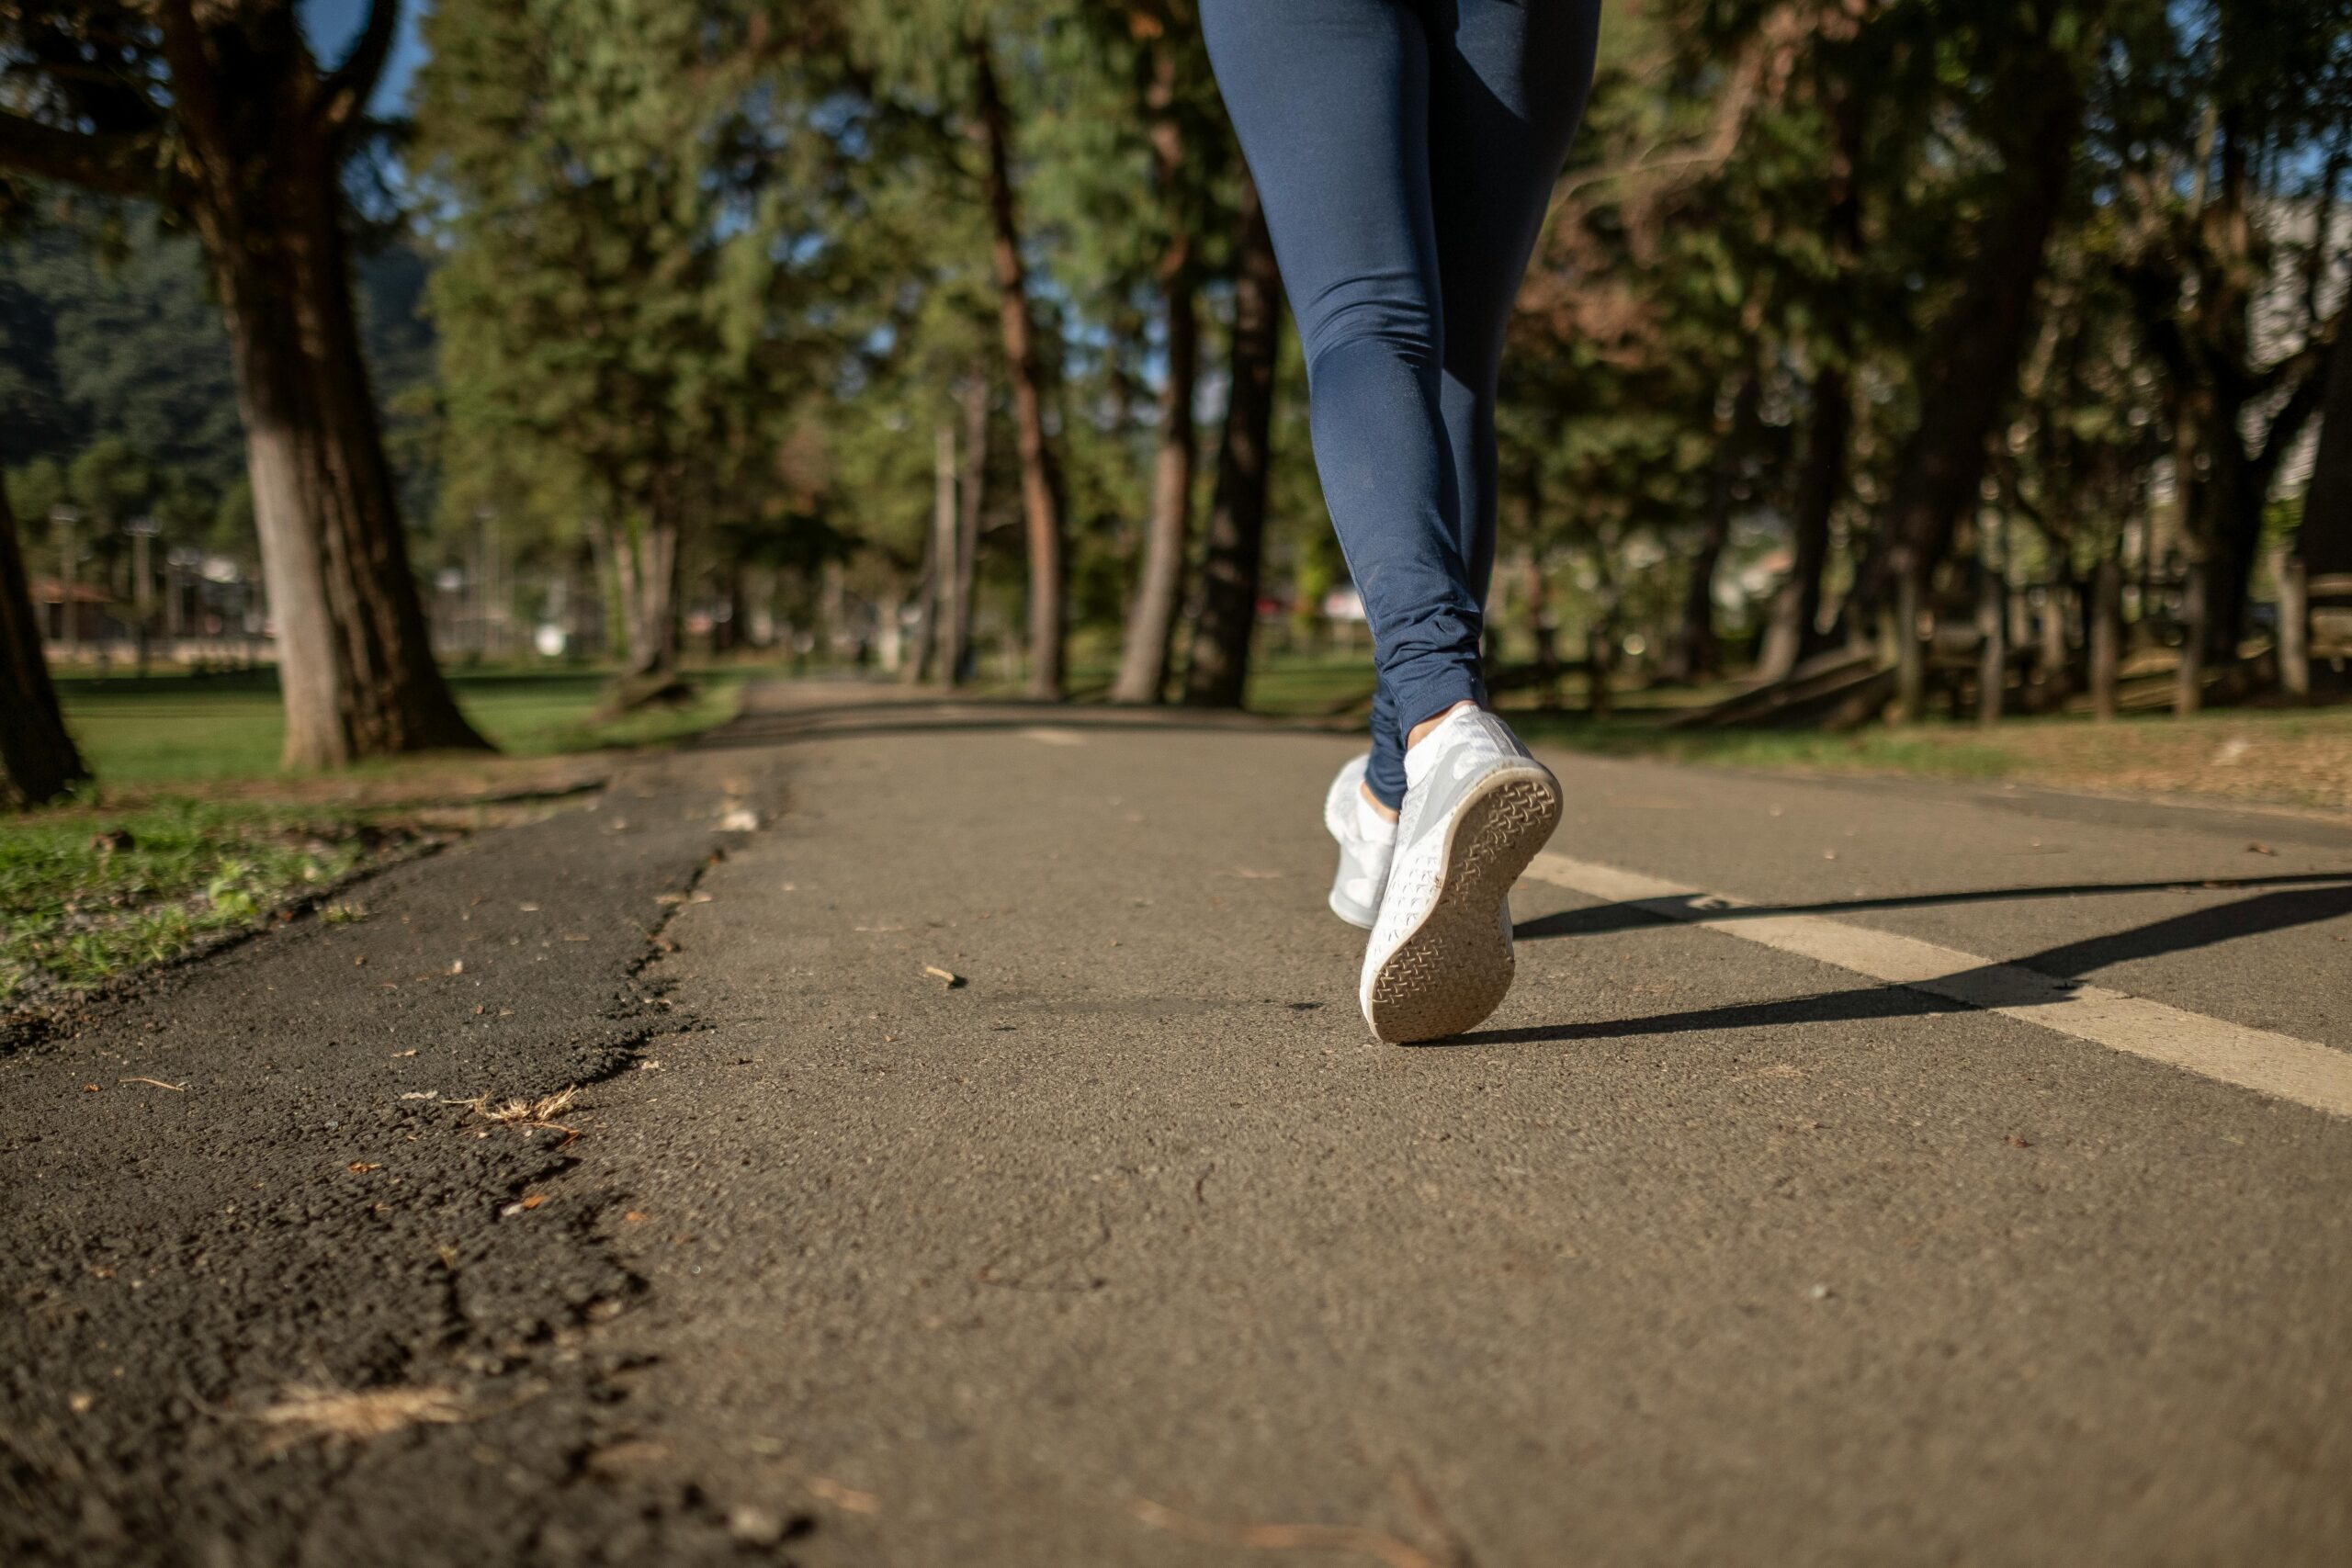 Close up view of someone running along a path in a park, wearing white trainers and blue trousers.